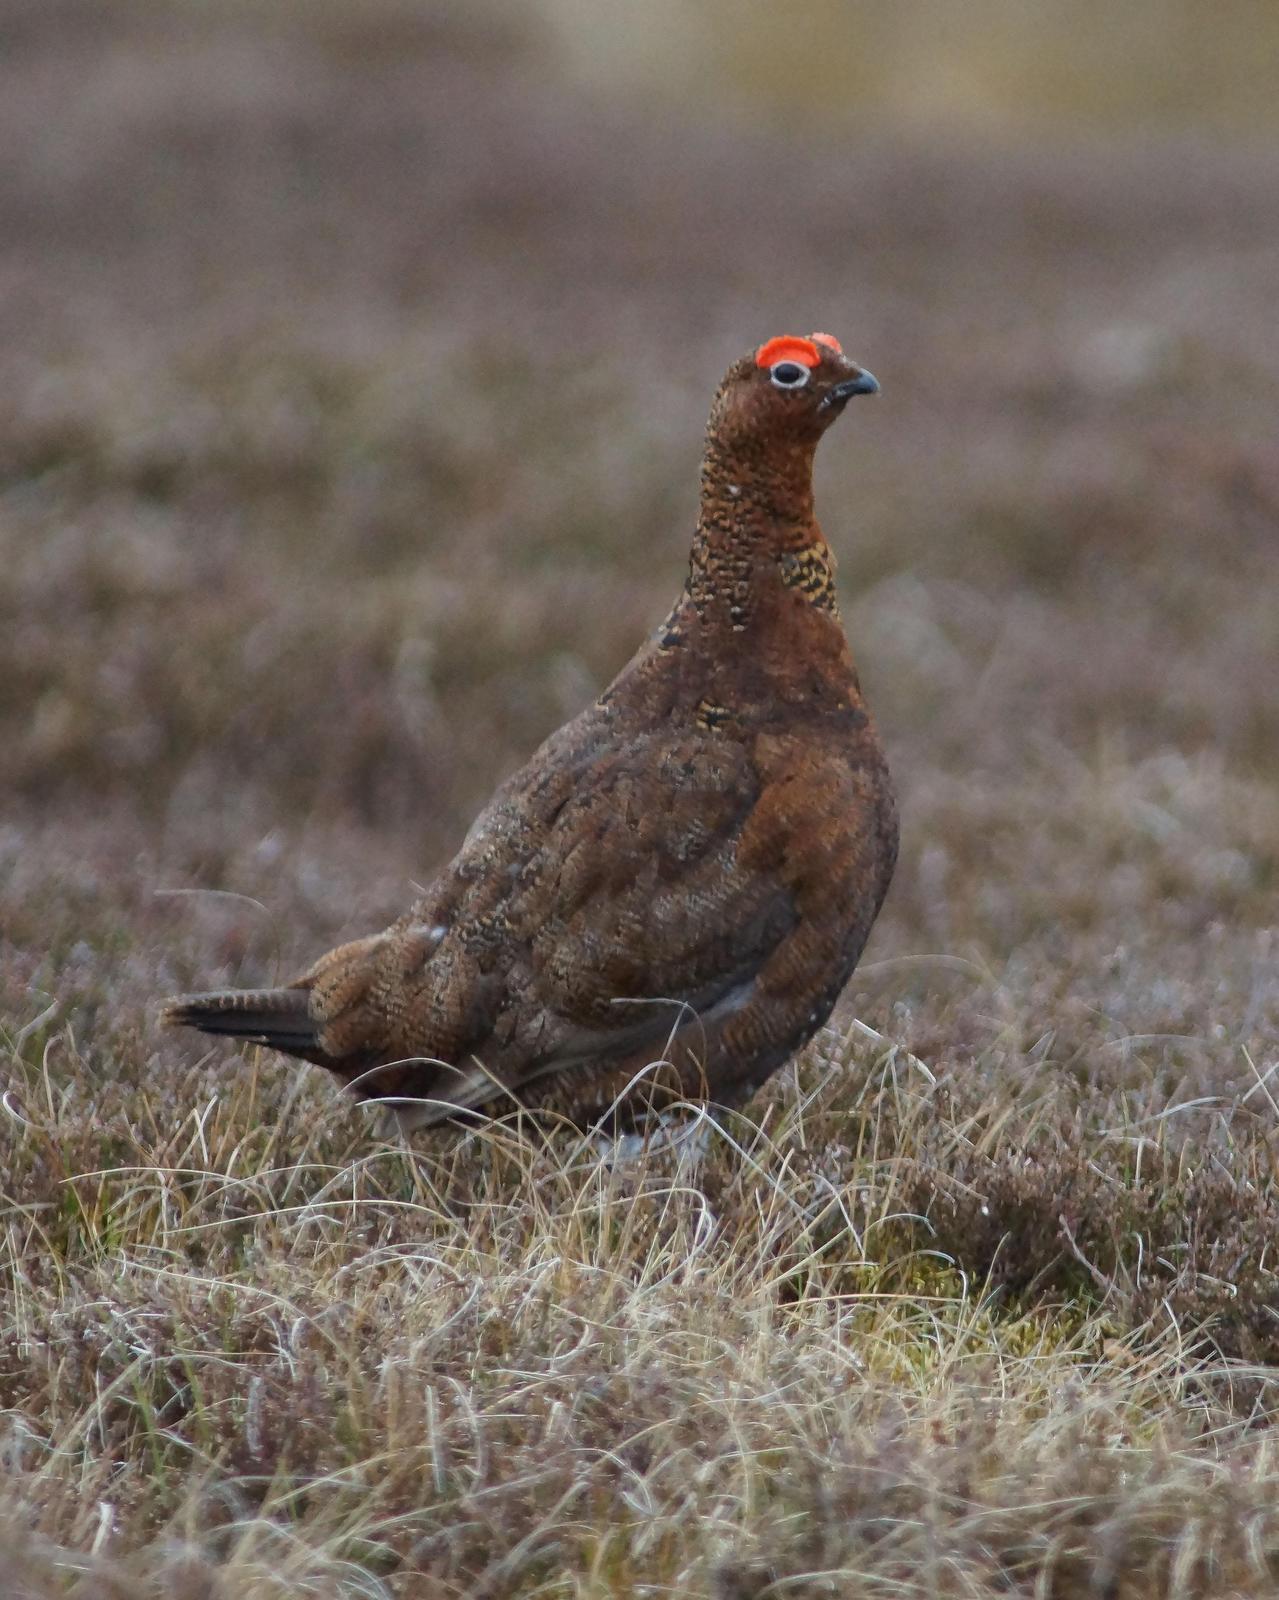 Willow Ptarmigan (Red Grouse) Photo by Steve Percival